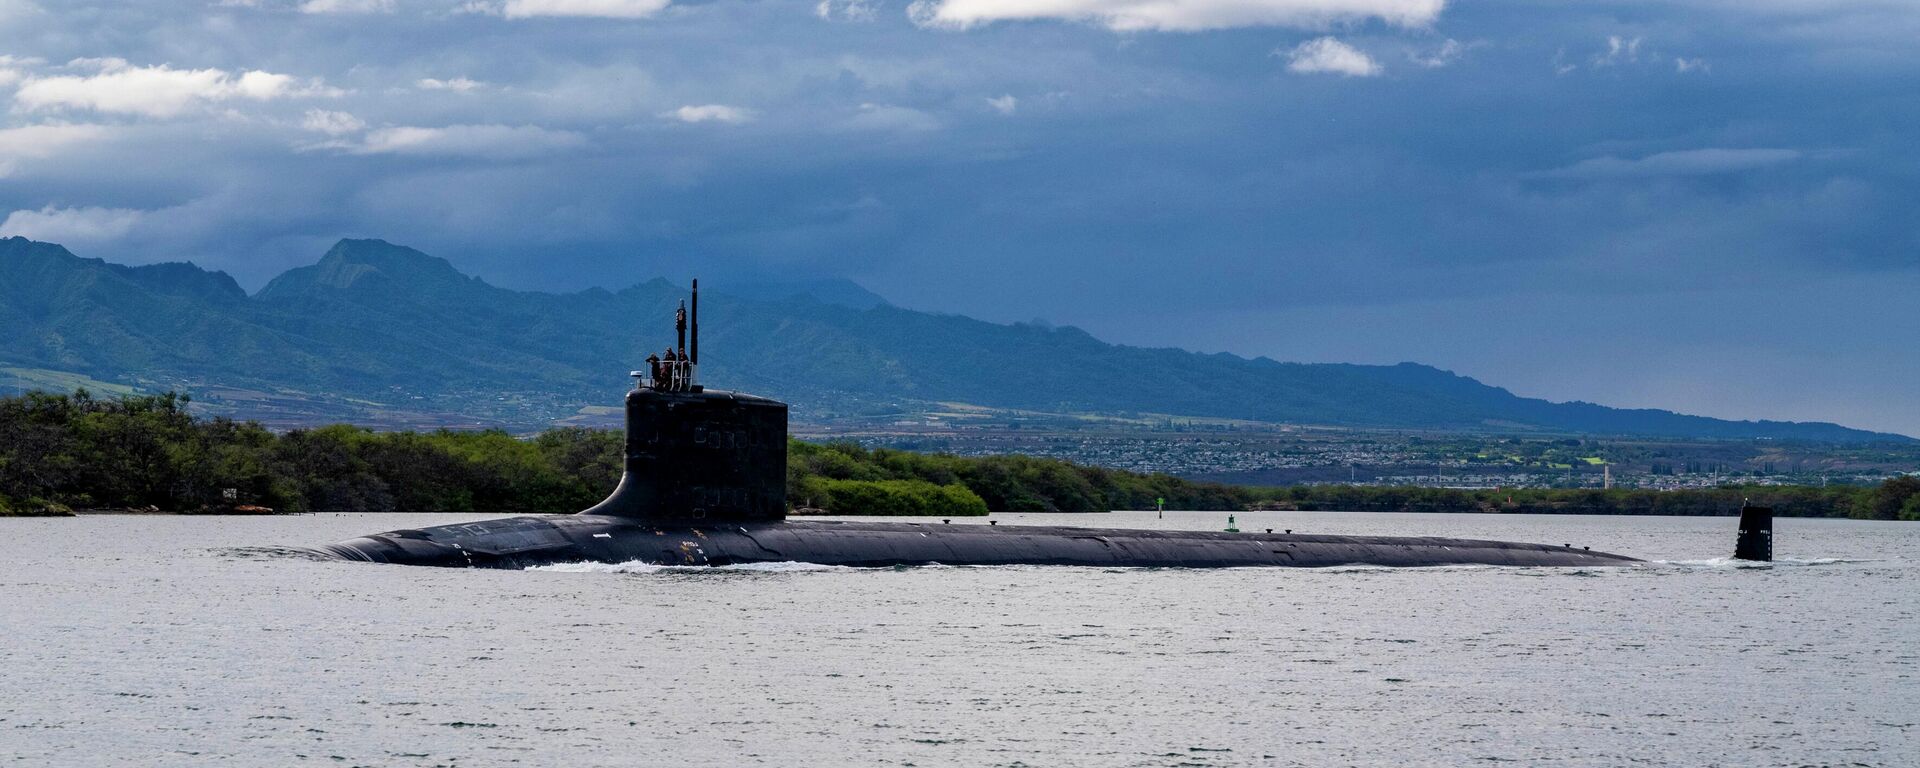 FILE - In this file photo provided by U.S. Navy, the Virginia-class fast-attack submarine USS Missouri (SSN 780) departs Joint Base Pearl Harbor-Hickam for a scheduled deployment in the 7th Fleet area of responsibility, Sept. 1, 2021. The foreign ministers of Malaysia and Indonesia expressed concern Monday, Oct. 18, 2021, that Australia’s plan to acquire nuclear-powered submarines from the U.S. in a security alliance may increase the rivalry of major powers in Southeast Asia - Sputnik International, 1920, 16.03.2023